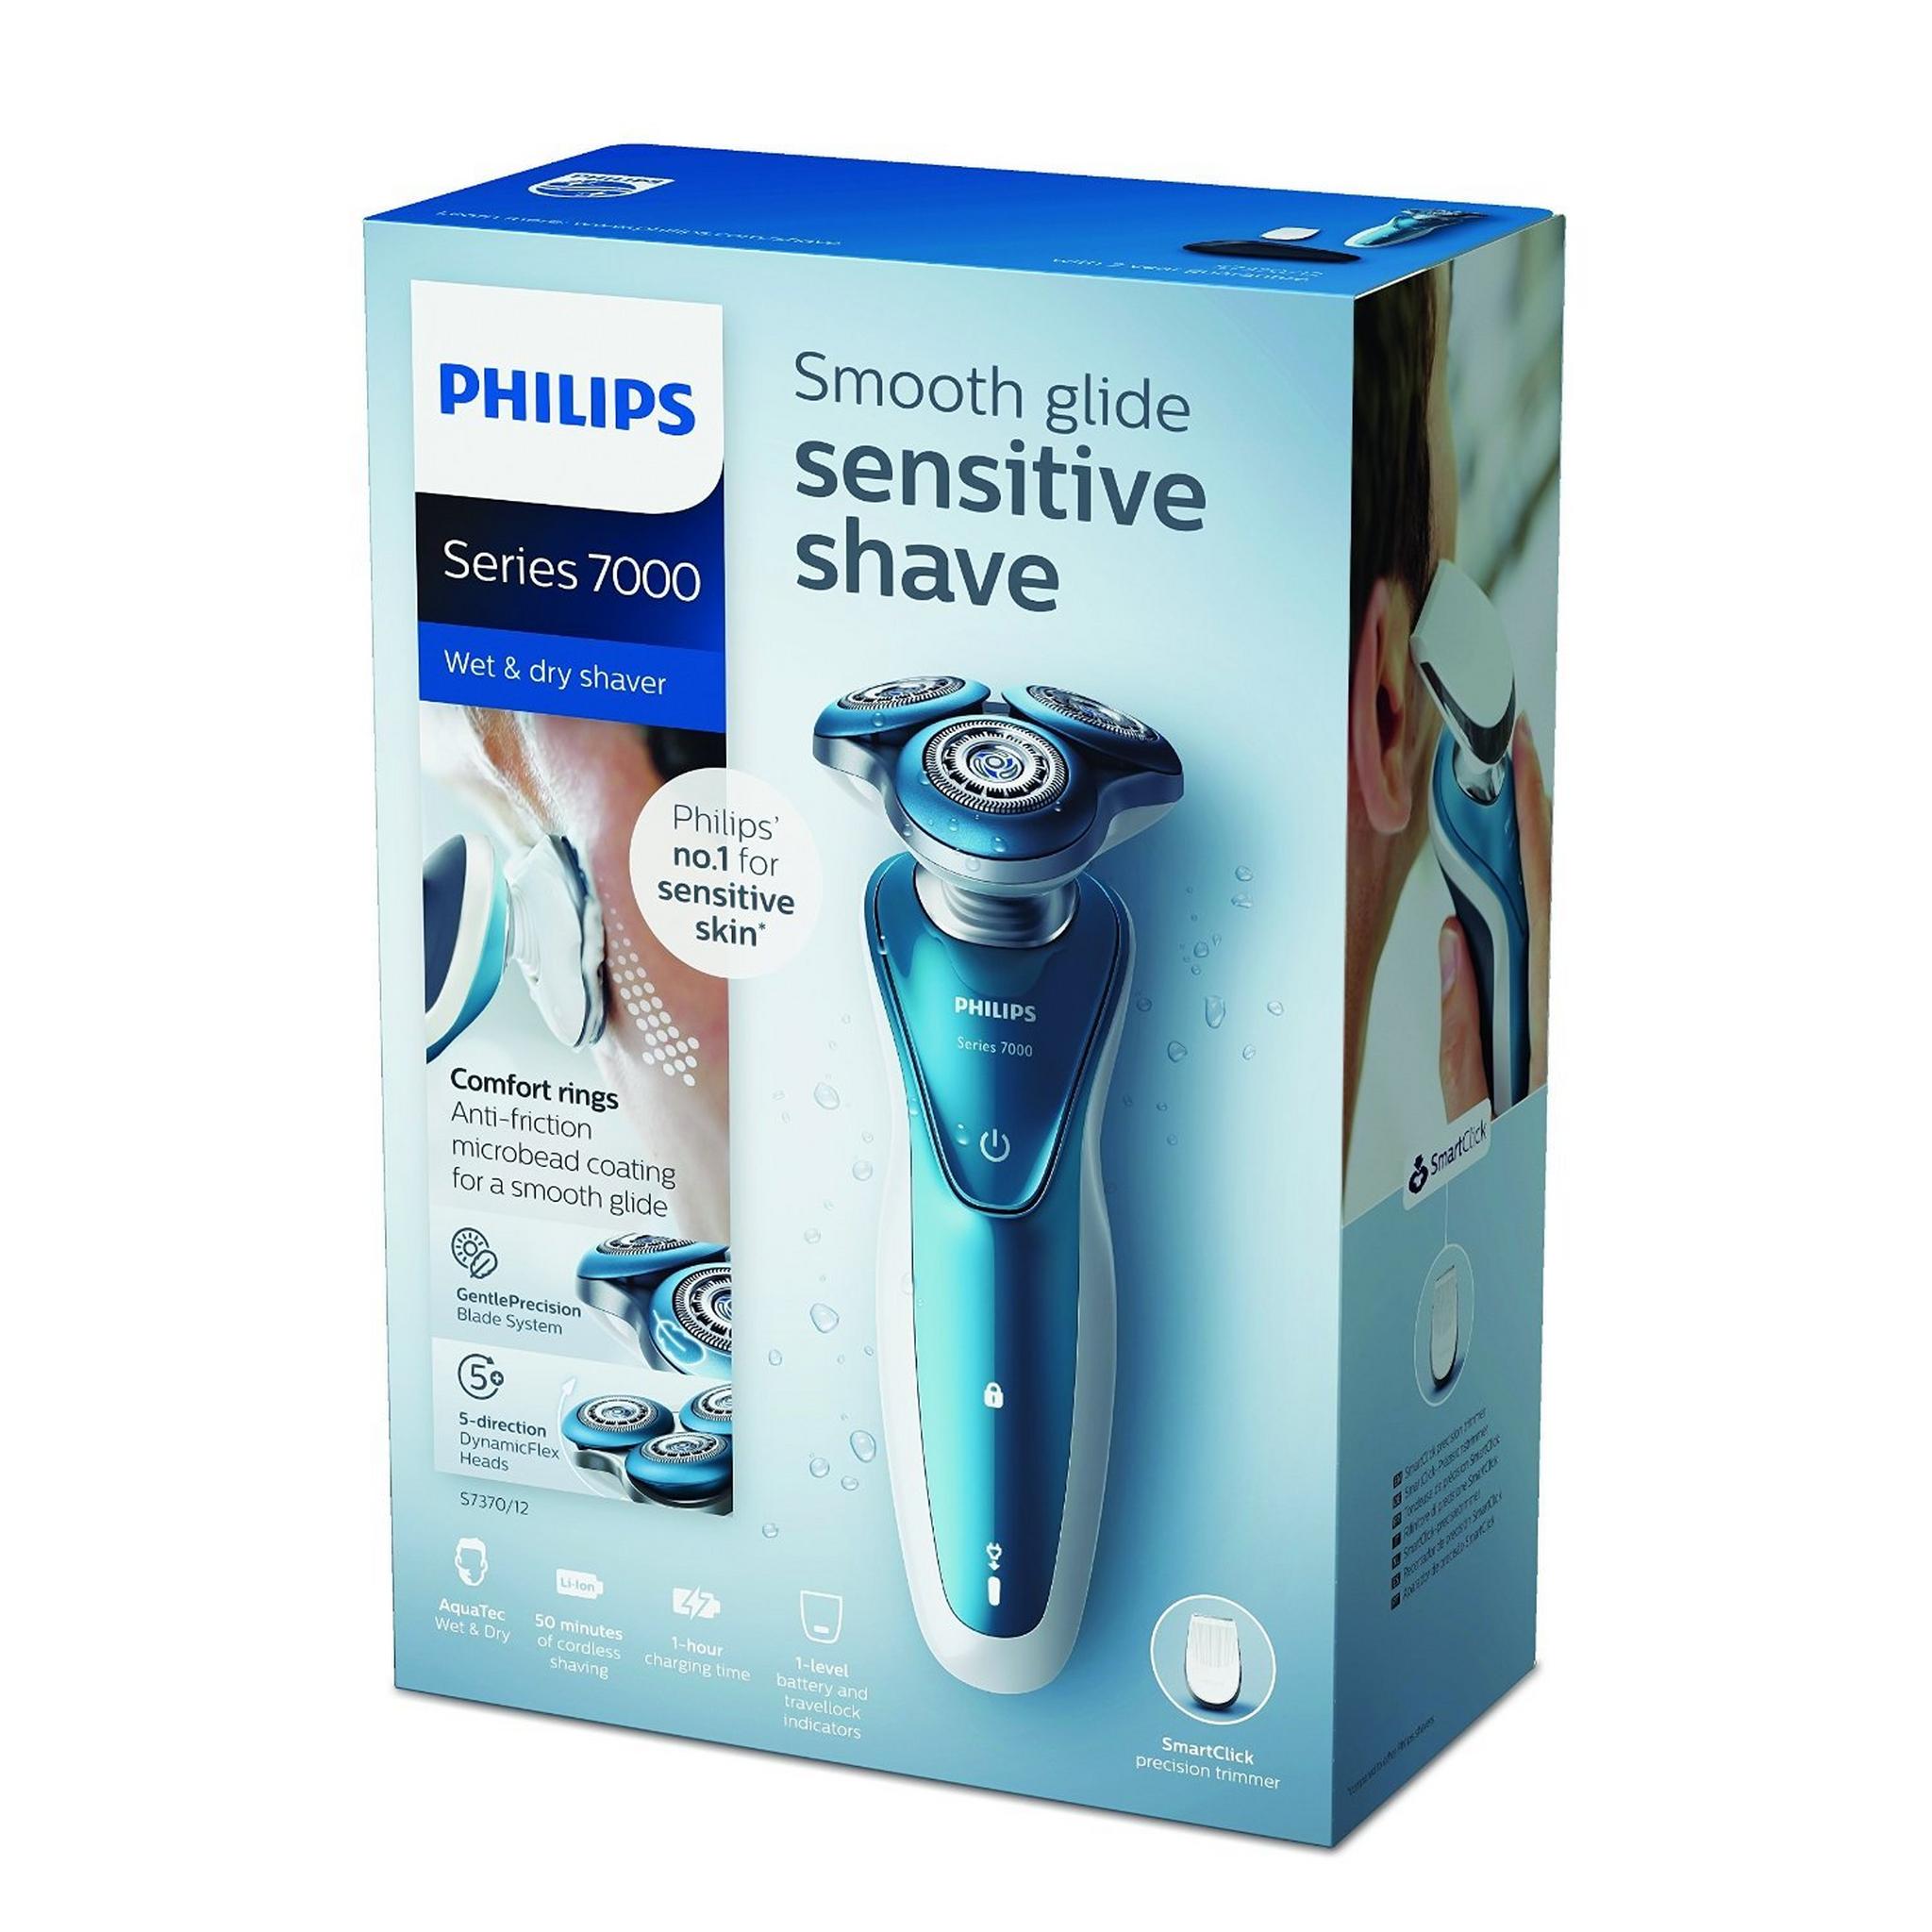 Philips S7370/12 Series 7000 Electric Shaver with Precision Trimmer